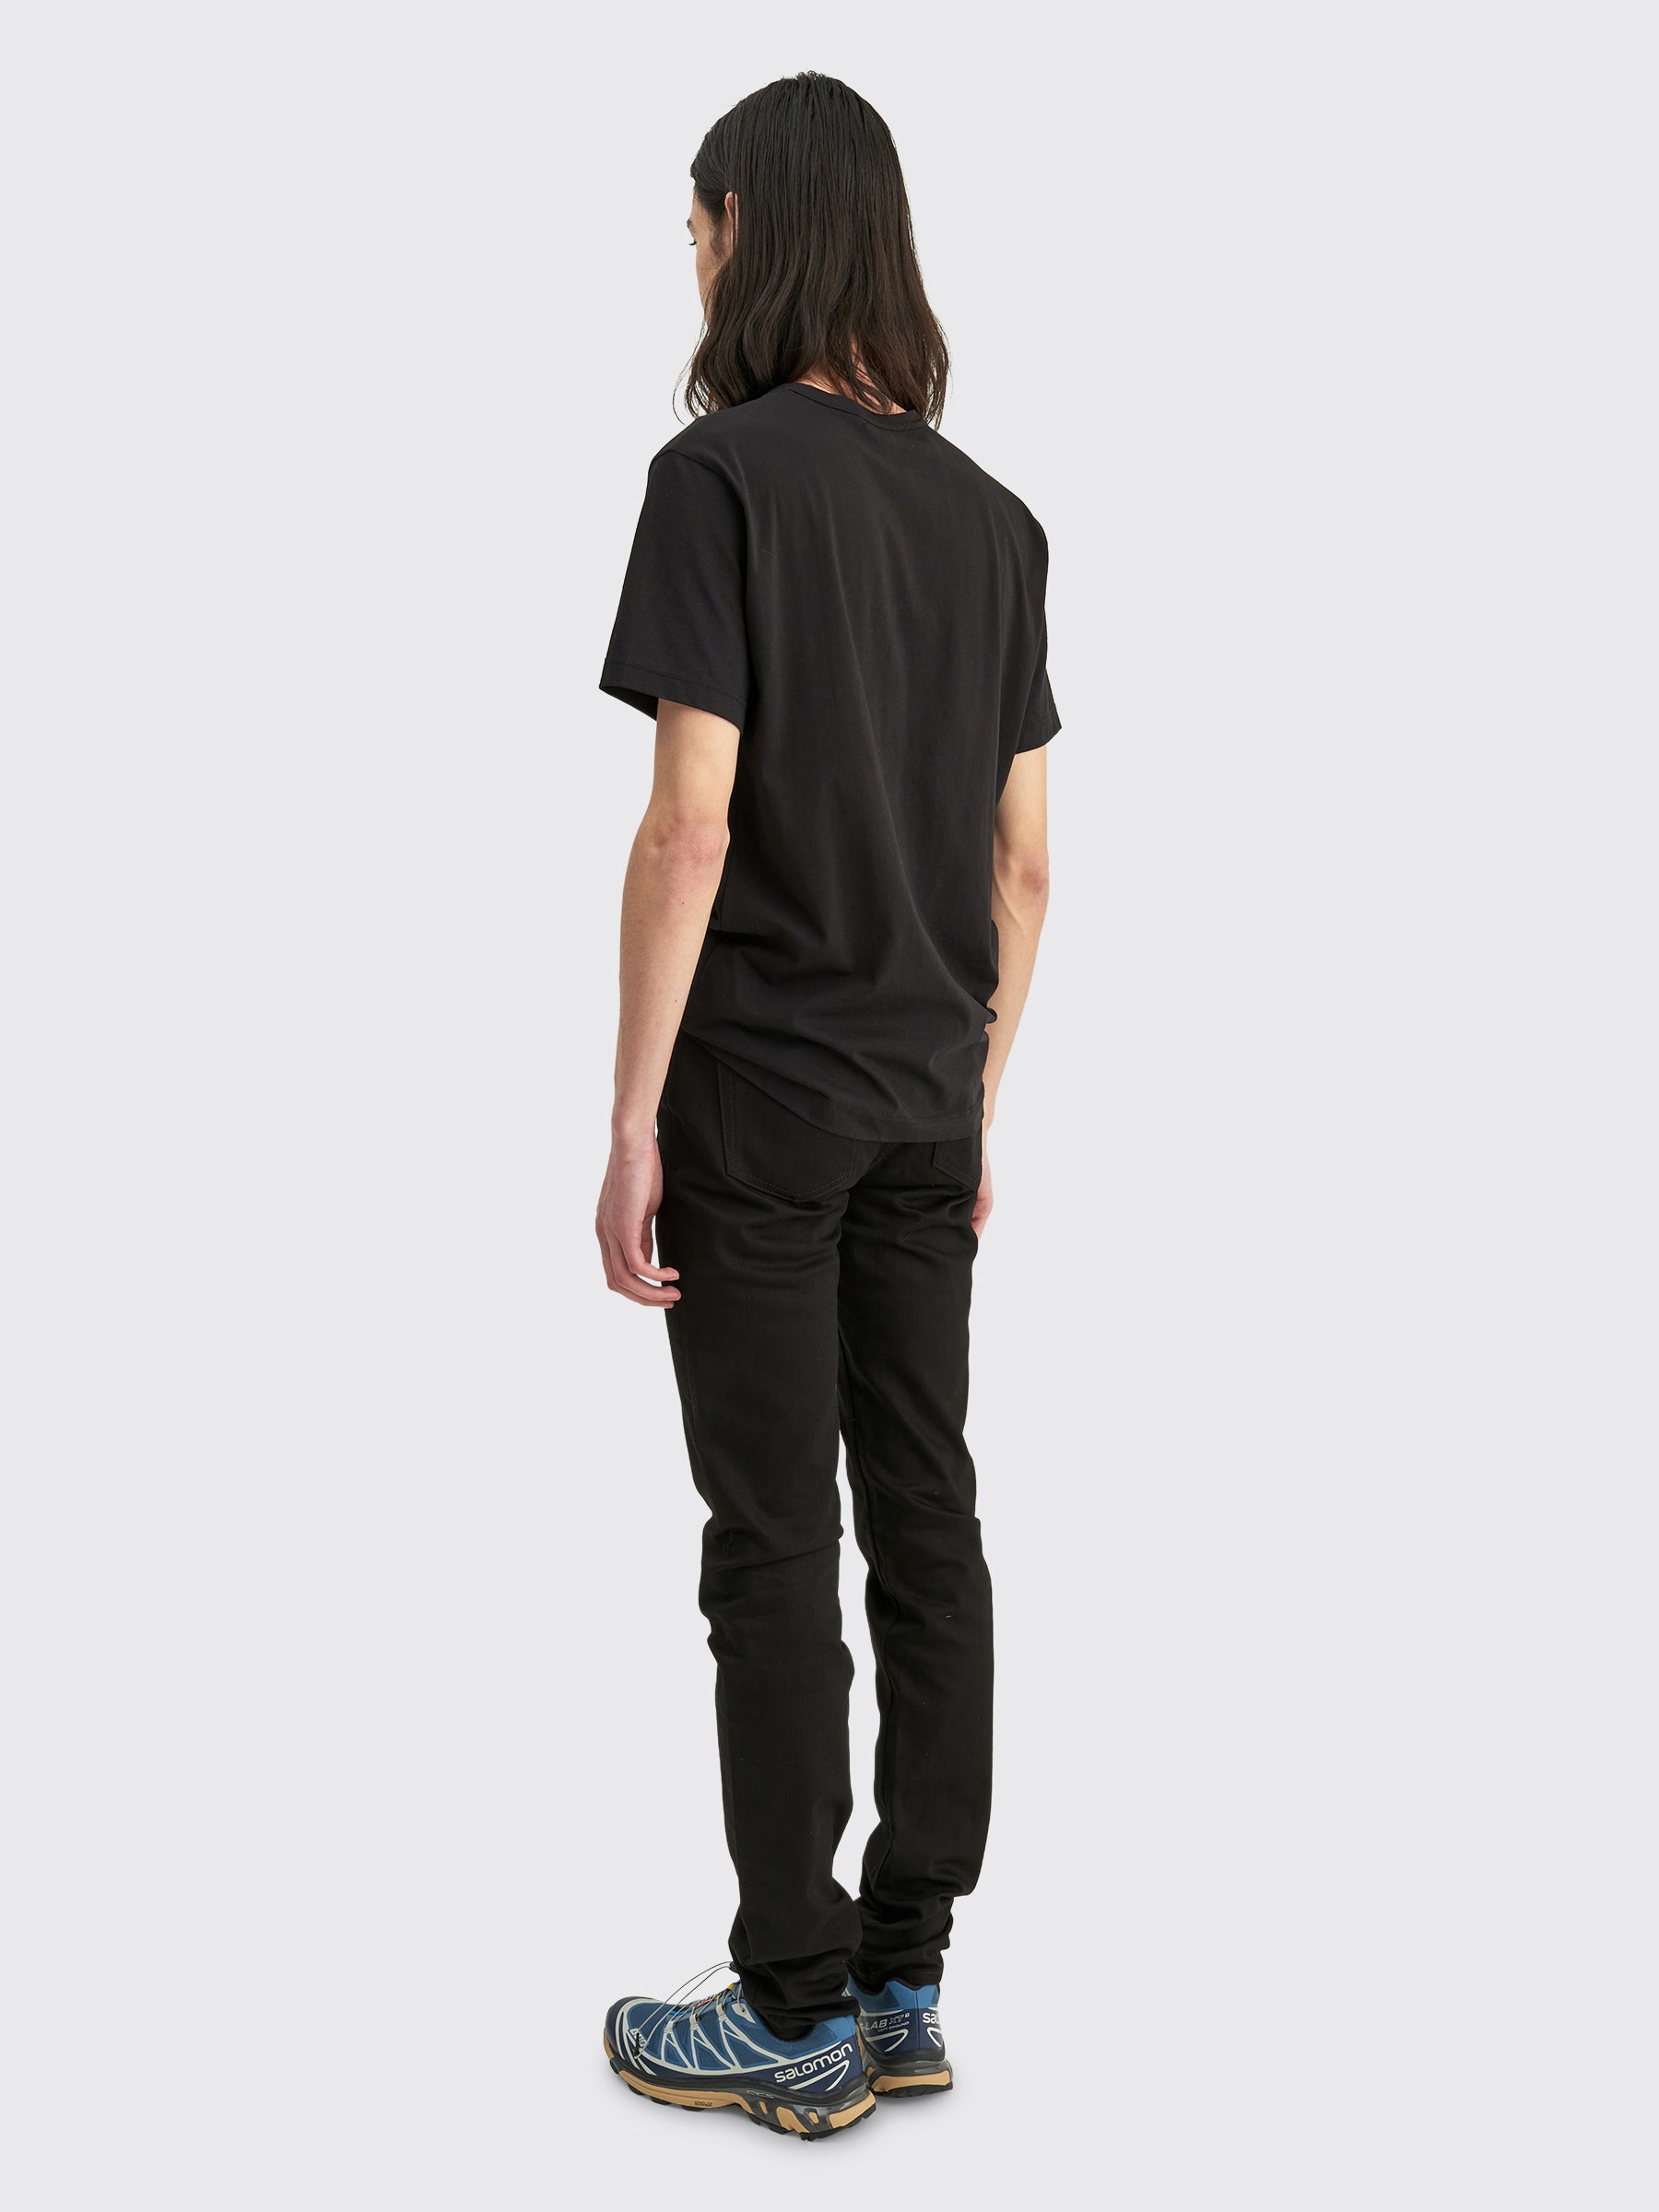 Acne Studios North Jeans Stay Black